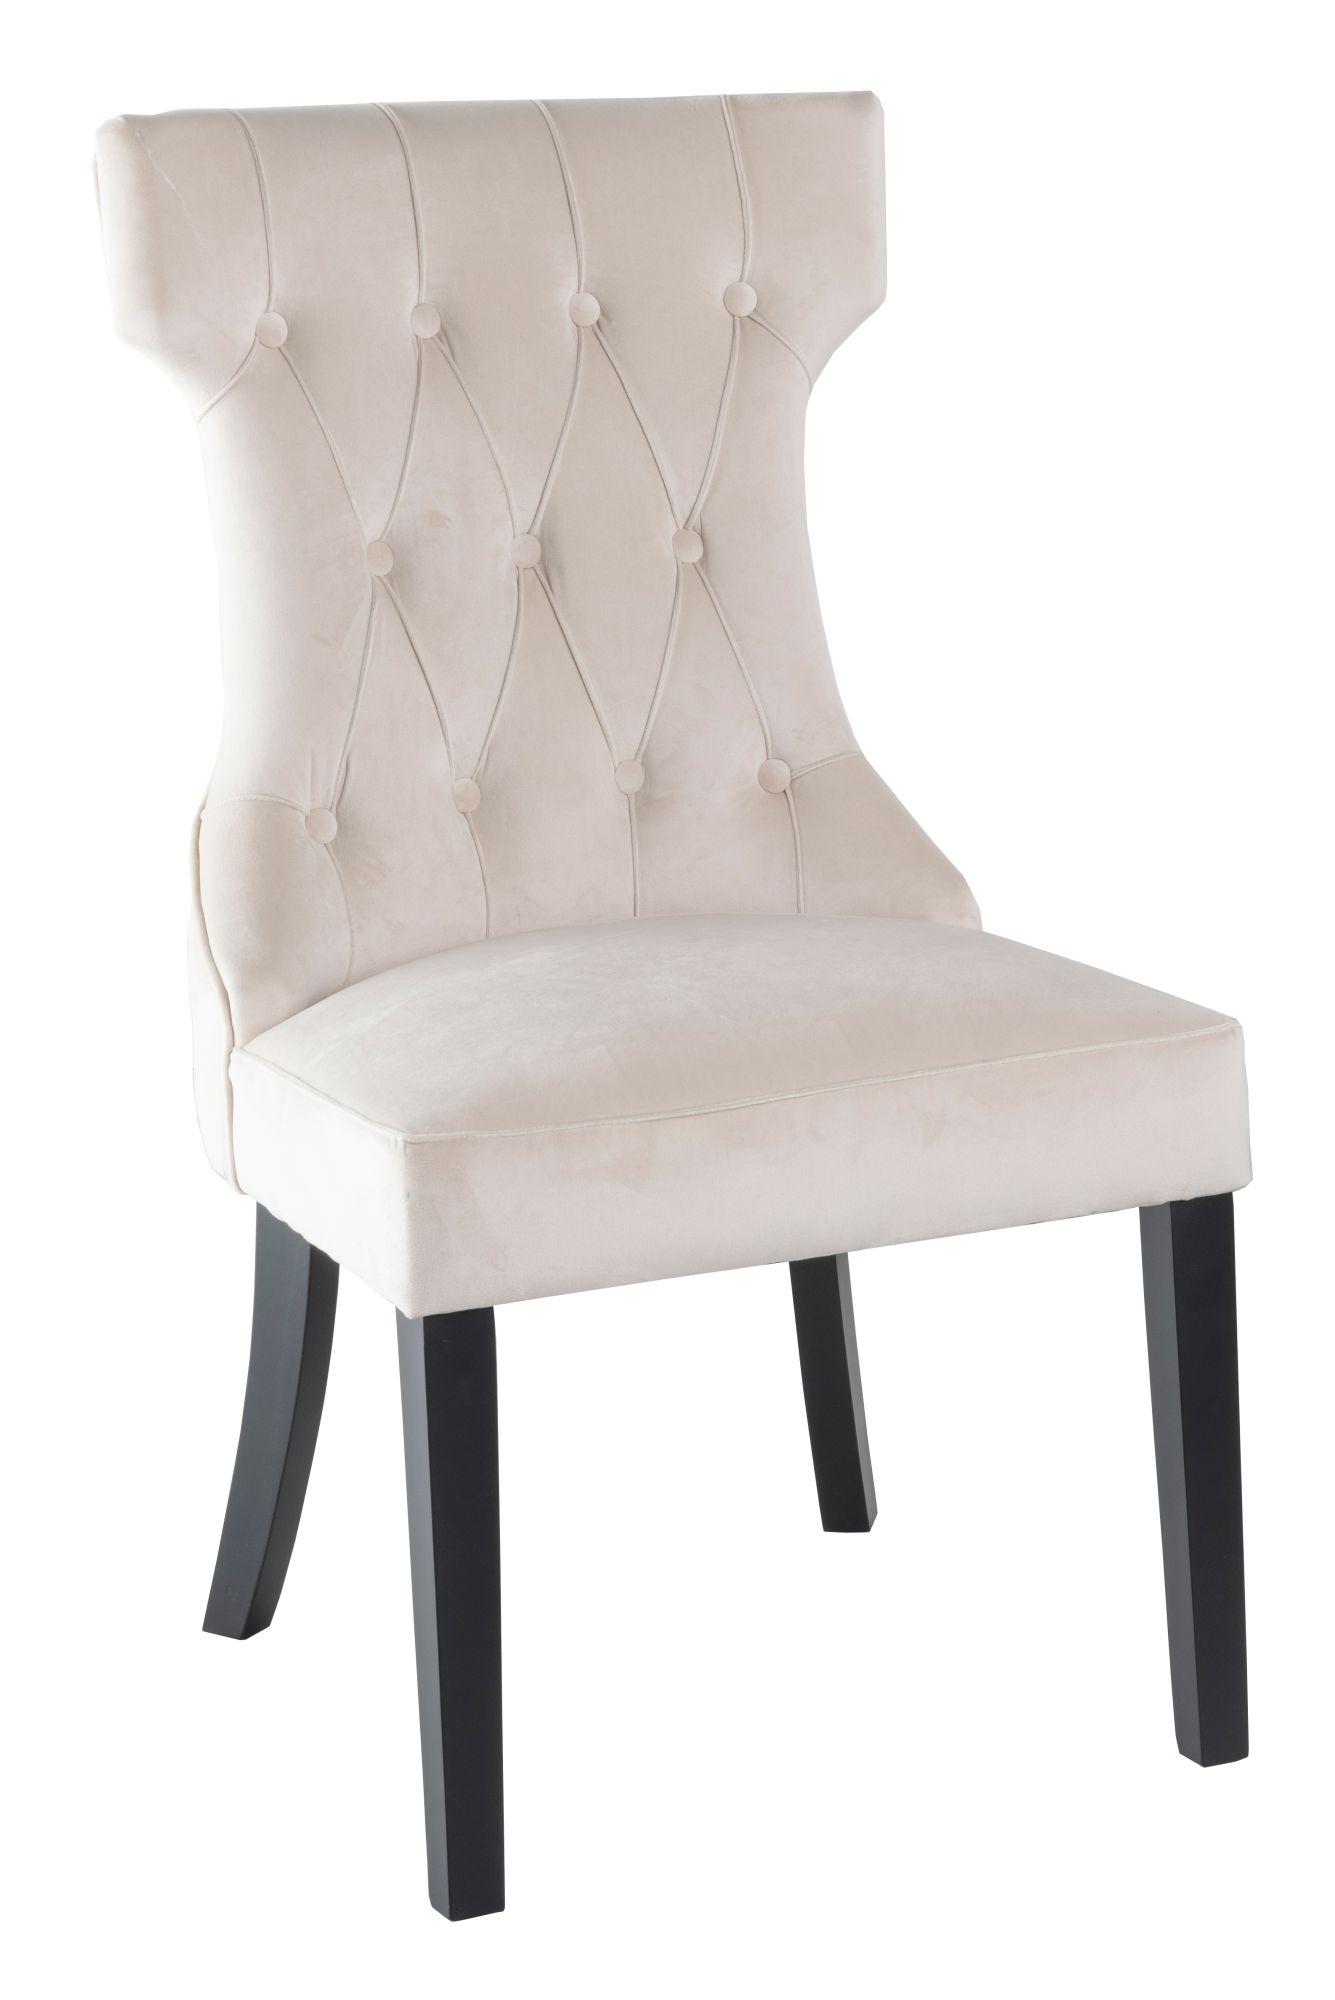 Courtney Champagne Dining Chair, Tufted Velvet Fabric Upholstered with Black Wooden Legs